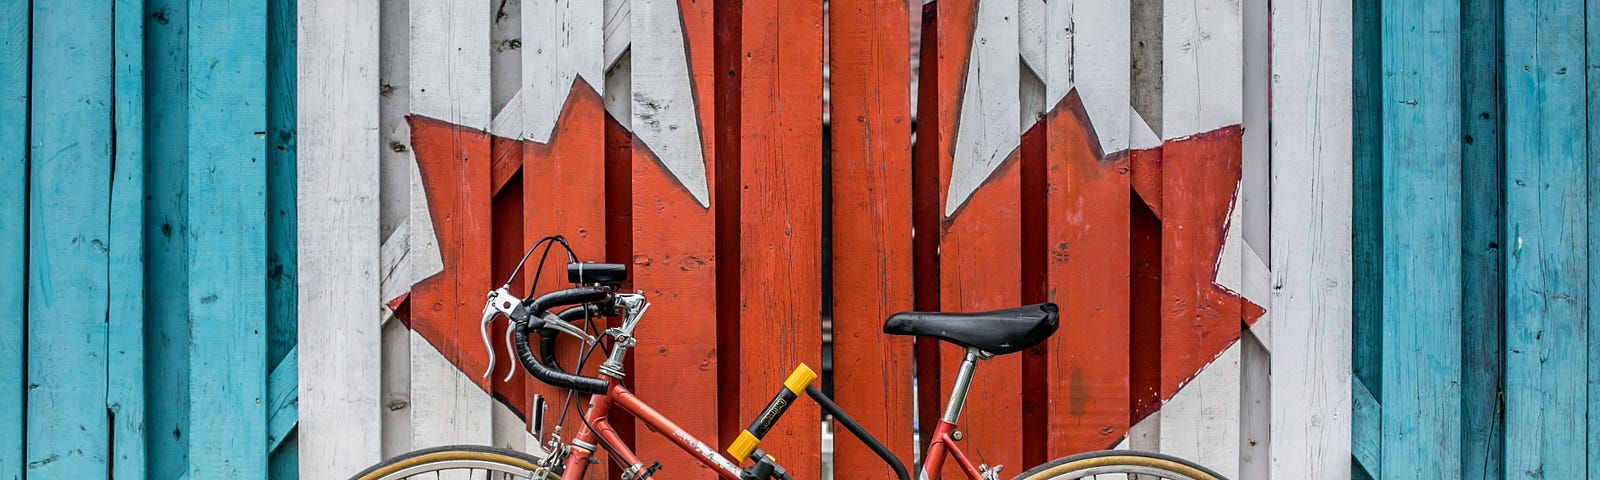 A bike leaning up against a wall with a painted maple leaf